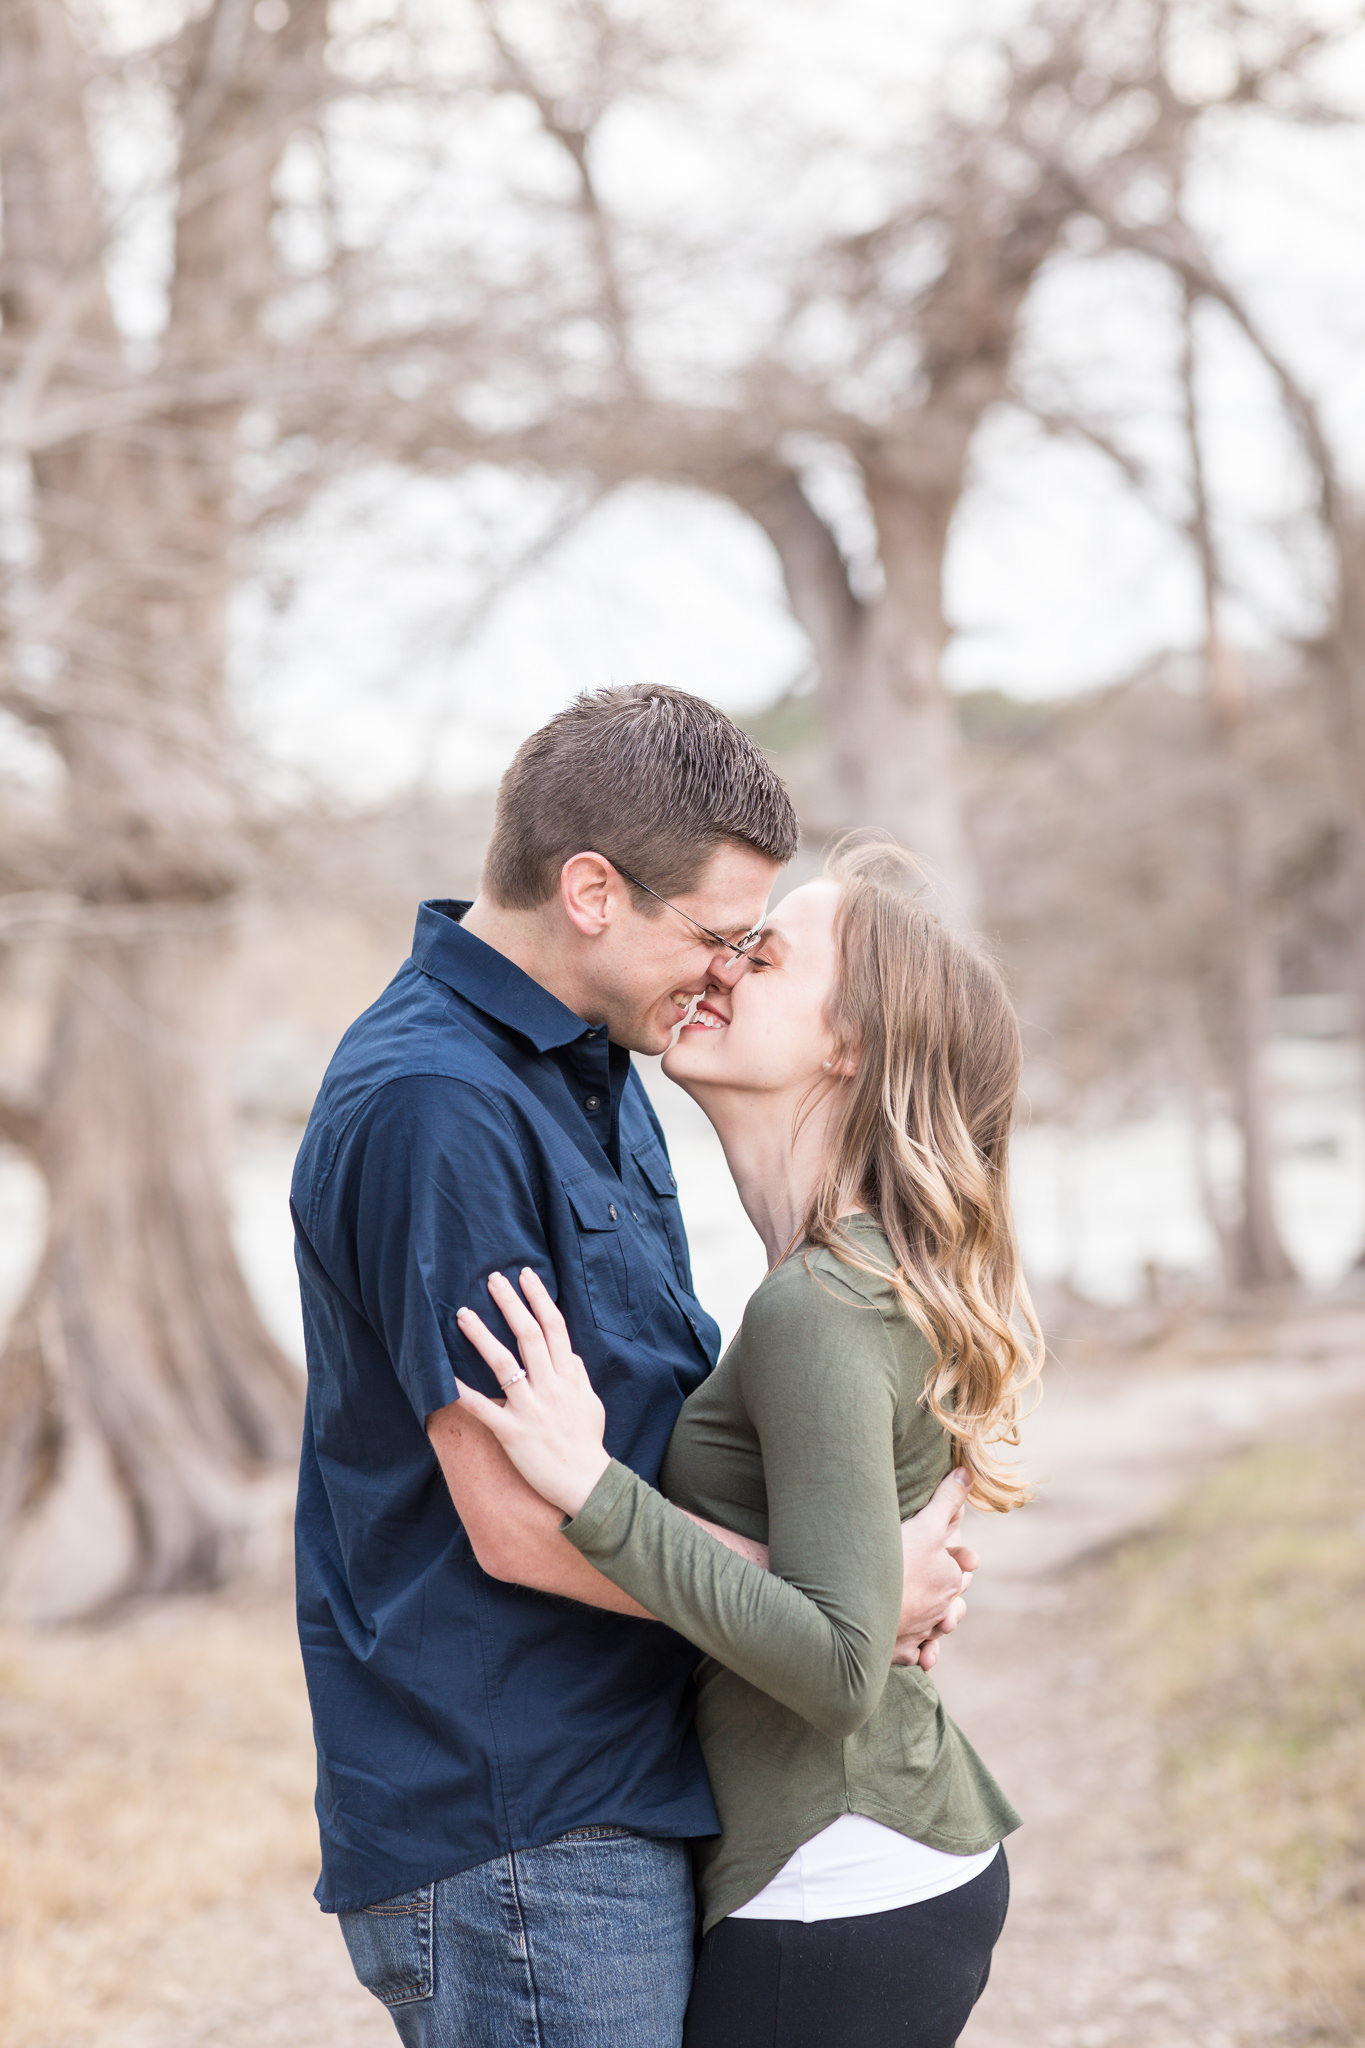 An Engagement Session at Guadalupe River State Park in Spring Branch, TX by Dawn Elizabeth Studios, Spring Branch Wedding Photographer